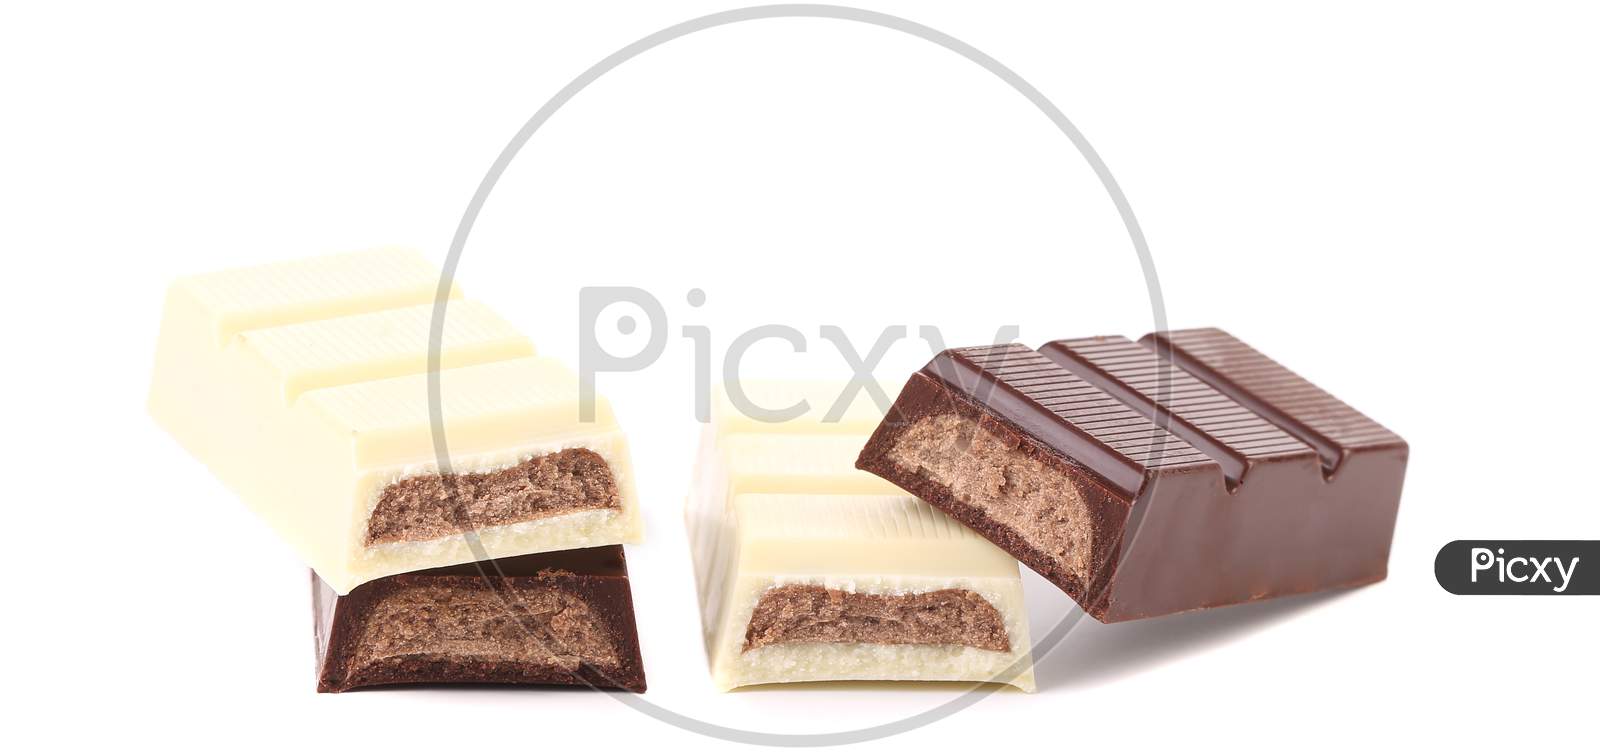 Chocolate Bar With Sweet Creamy Filling. Isolated On A White Background.